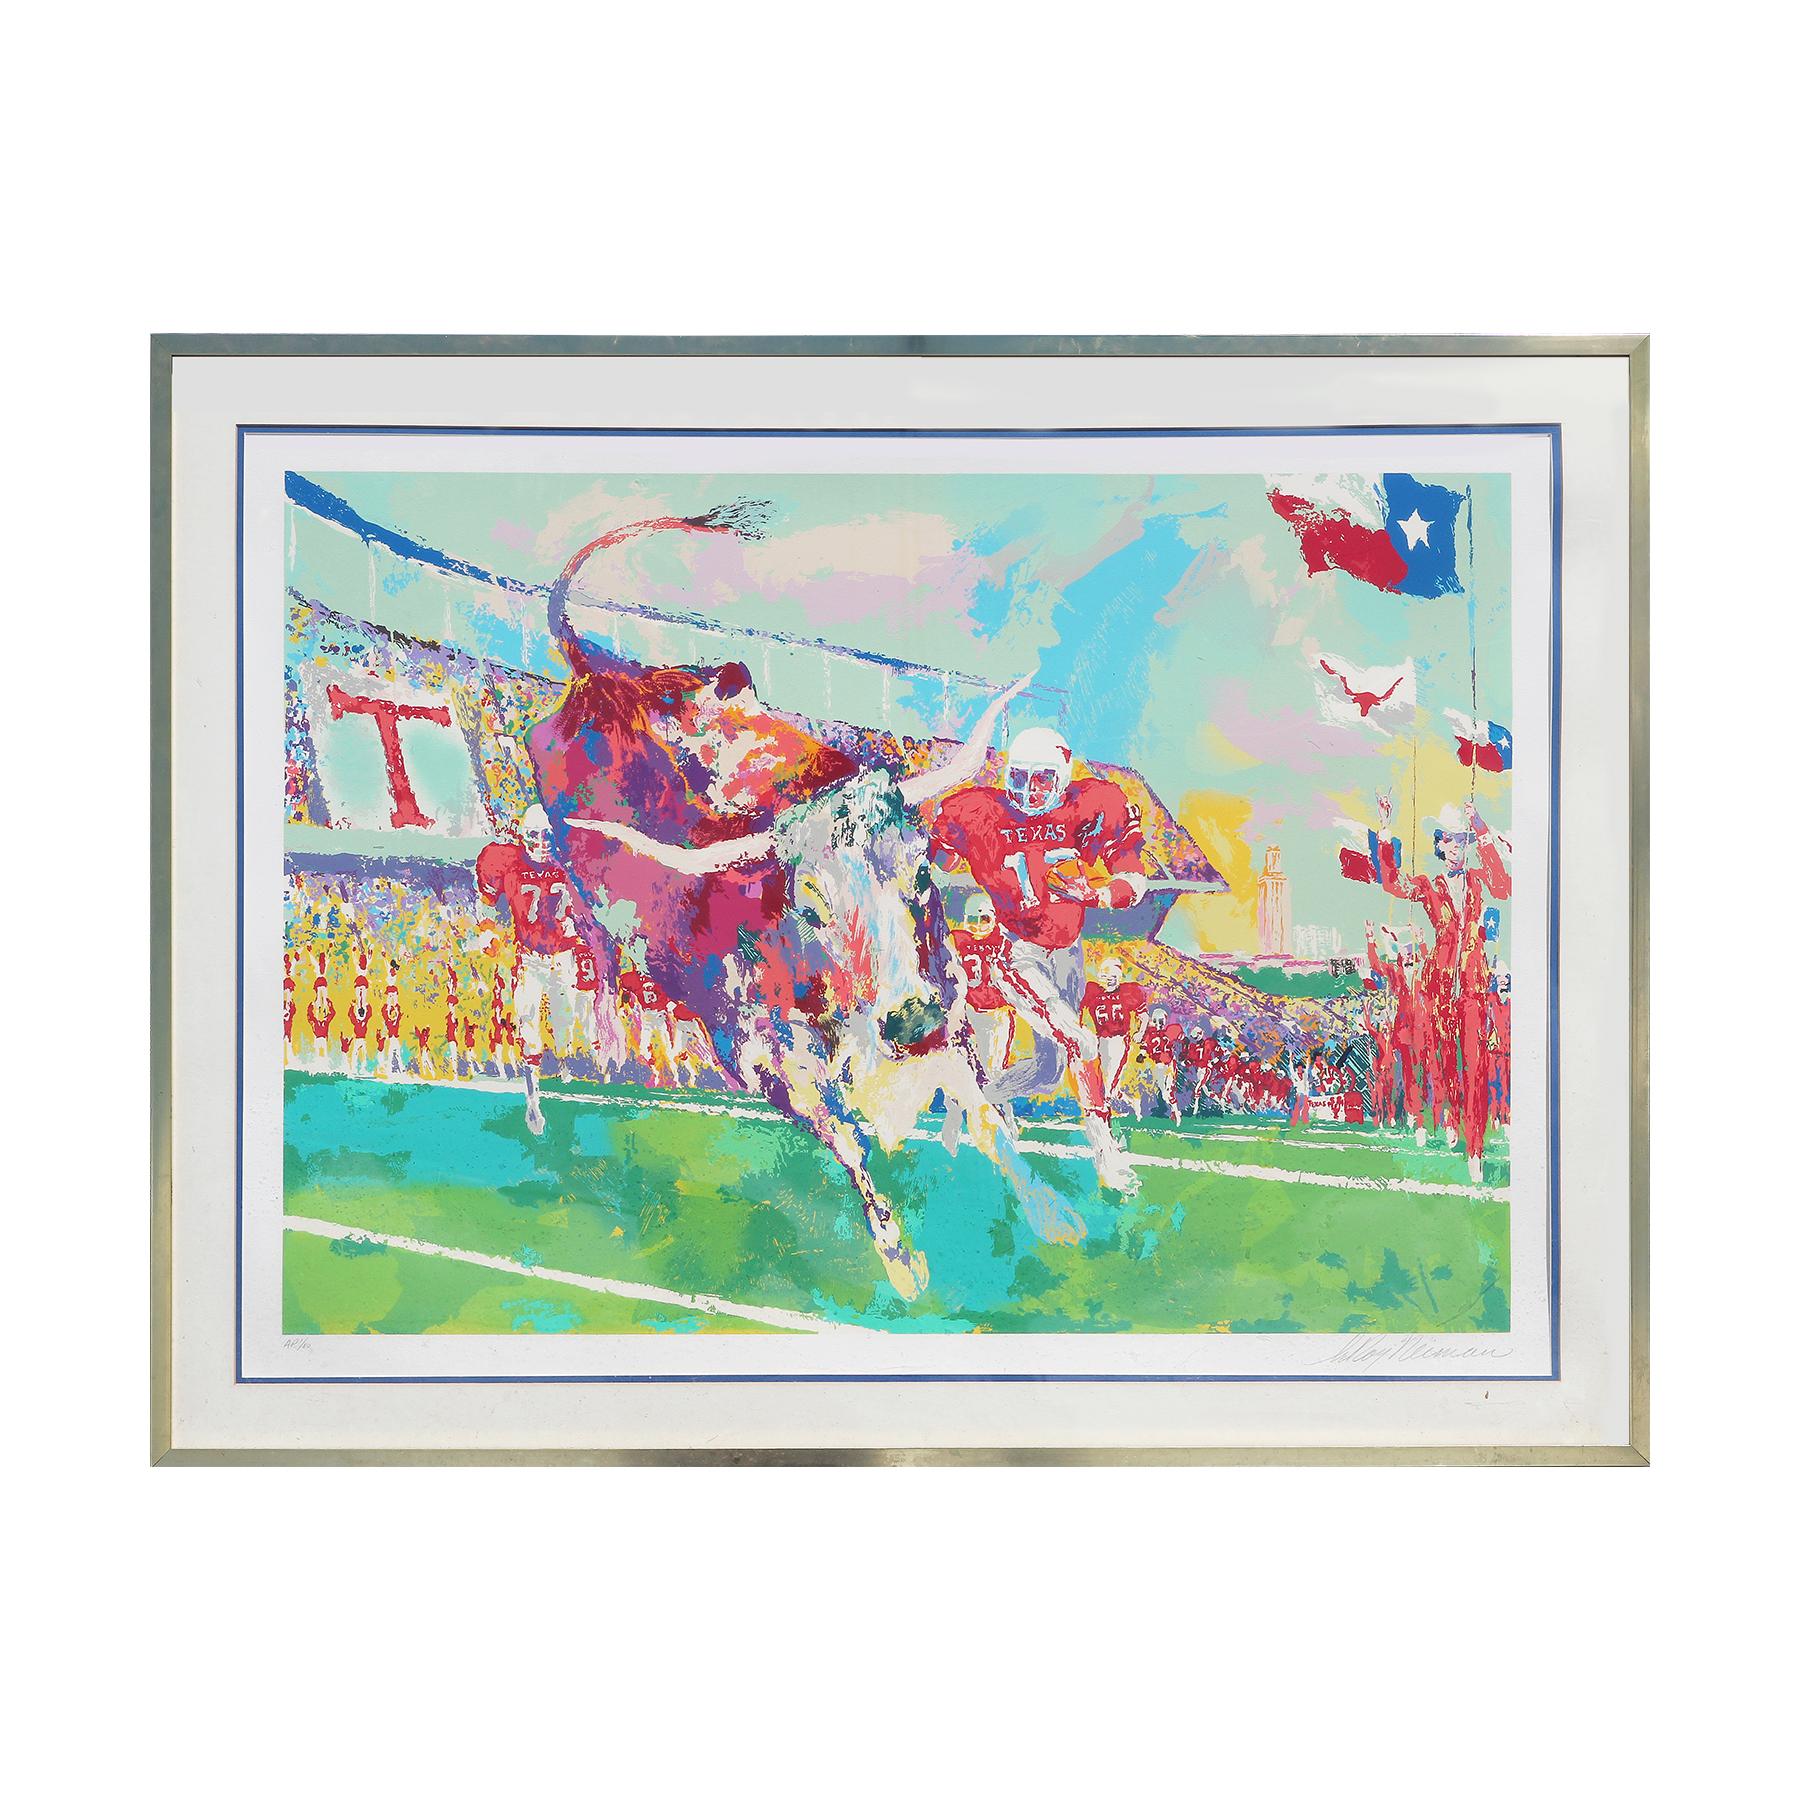 Leroy Neiman Figurative Painting - Colorful Abstract Contemporary Texas Longhorn Football Game Lithograph 